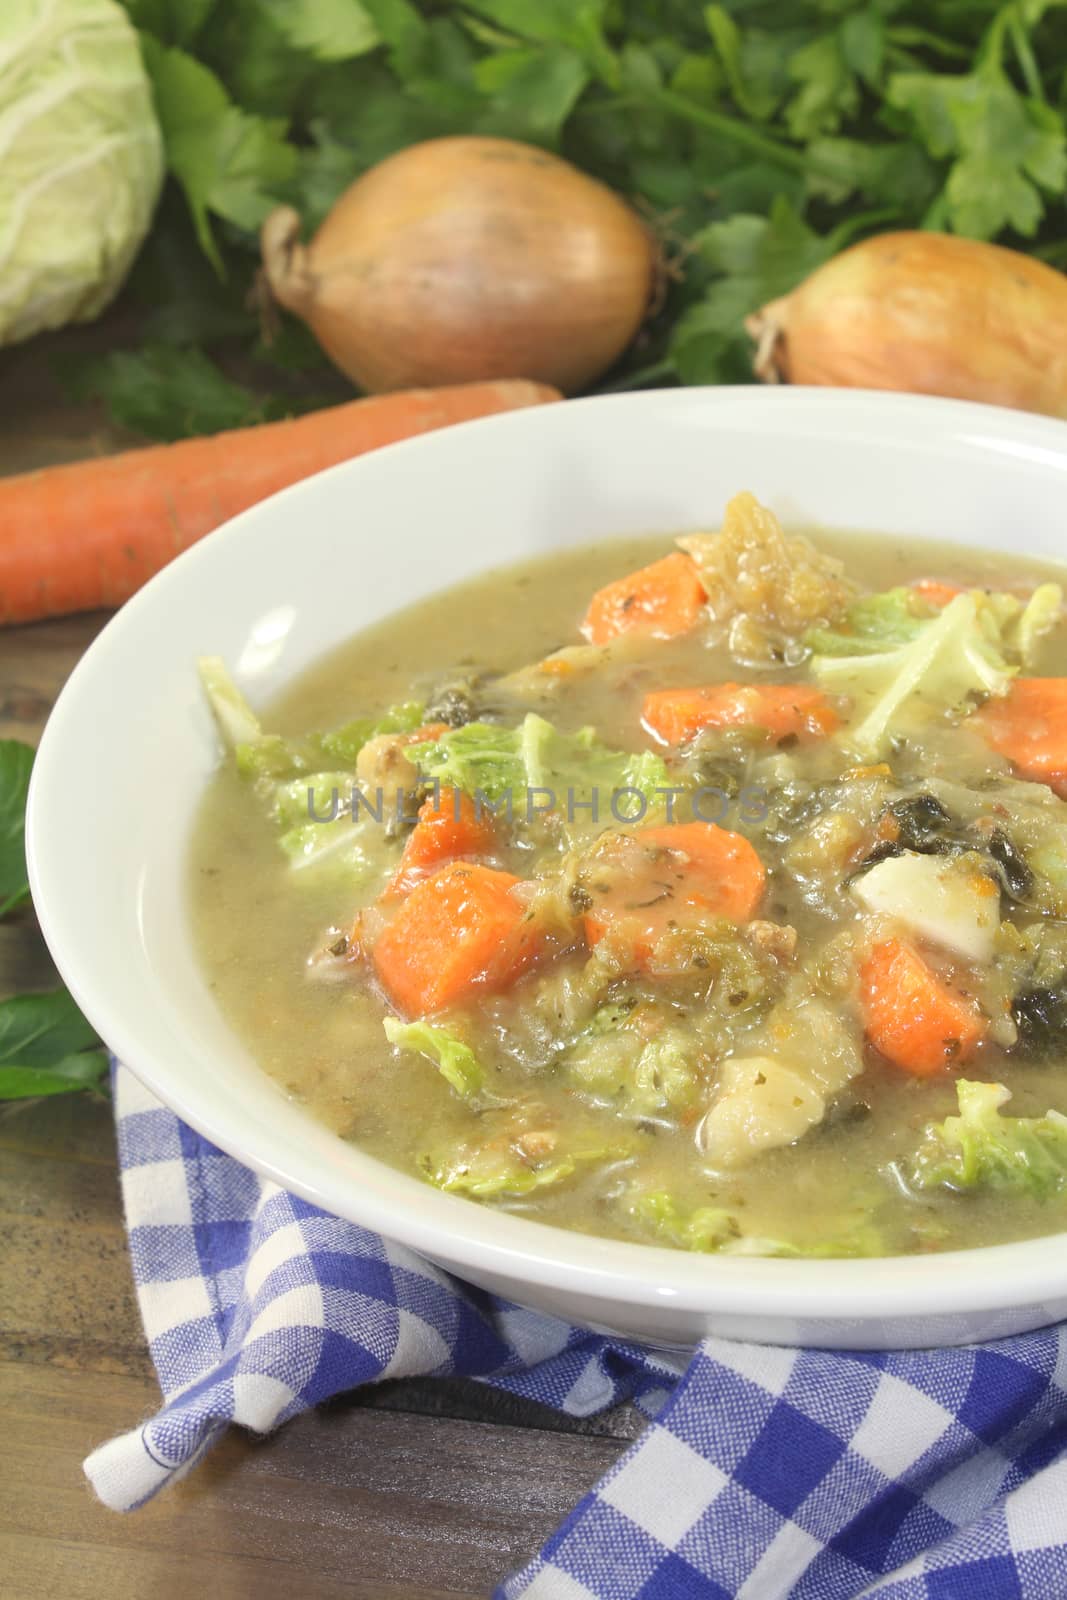 hot homemade cabbage stew with vegetables